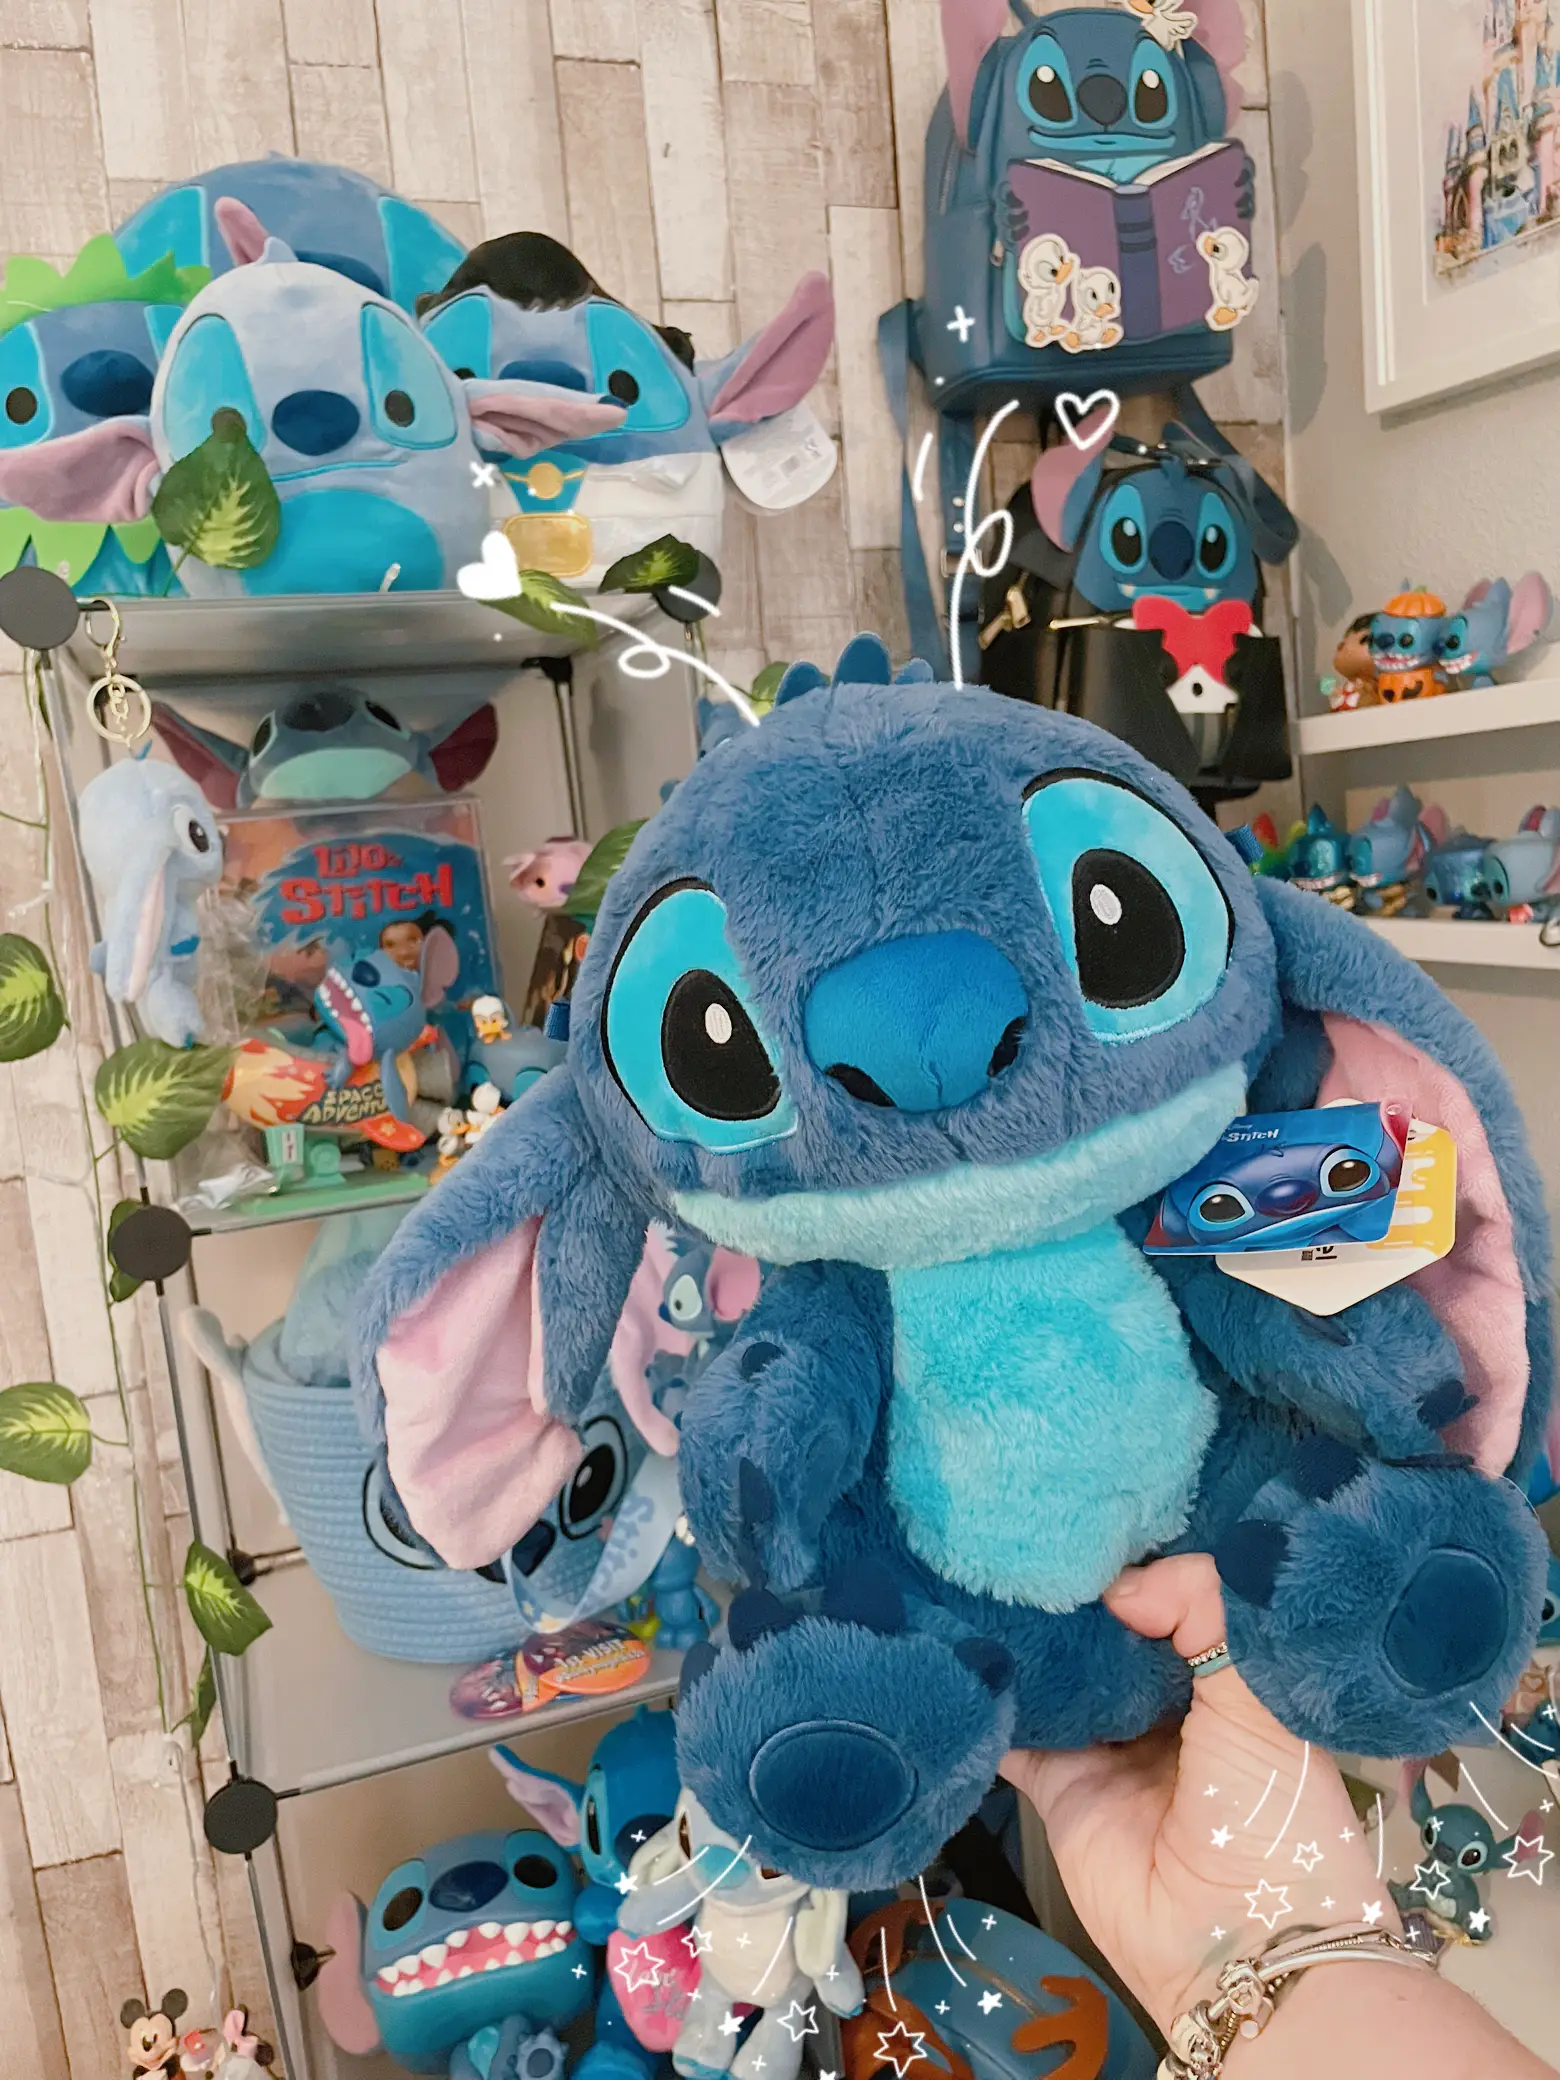 ✨Always surfing the Internet for new stitch merch✨, Gallery posted by  Disneymagic626